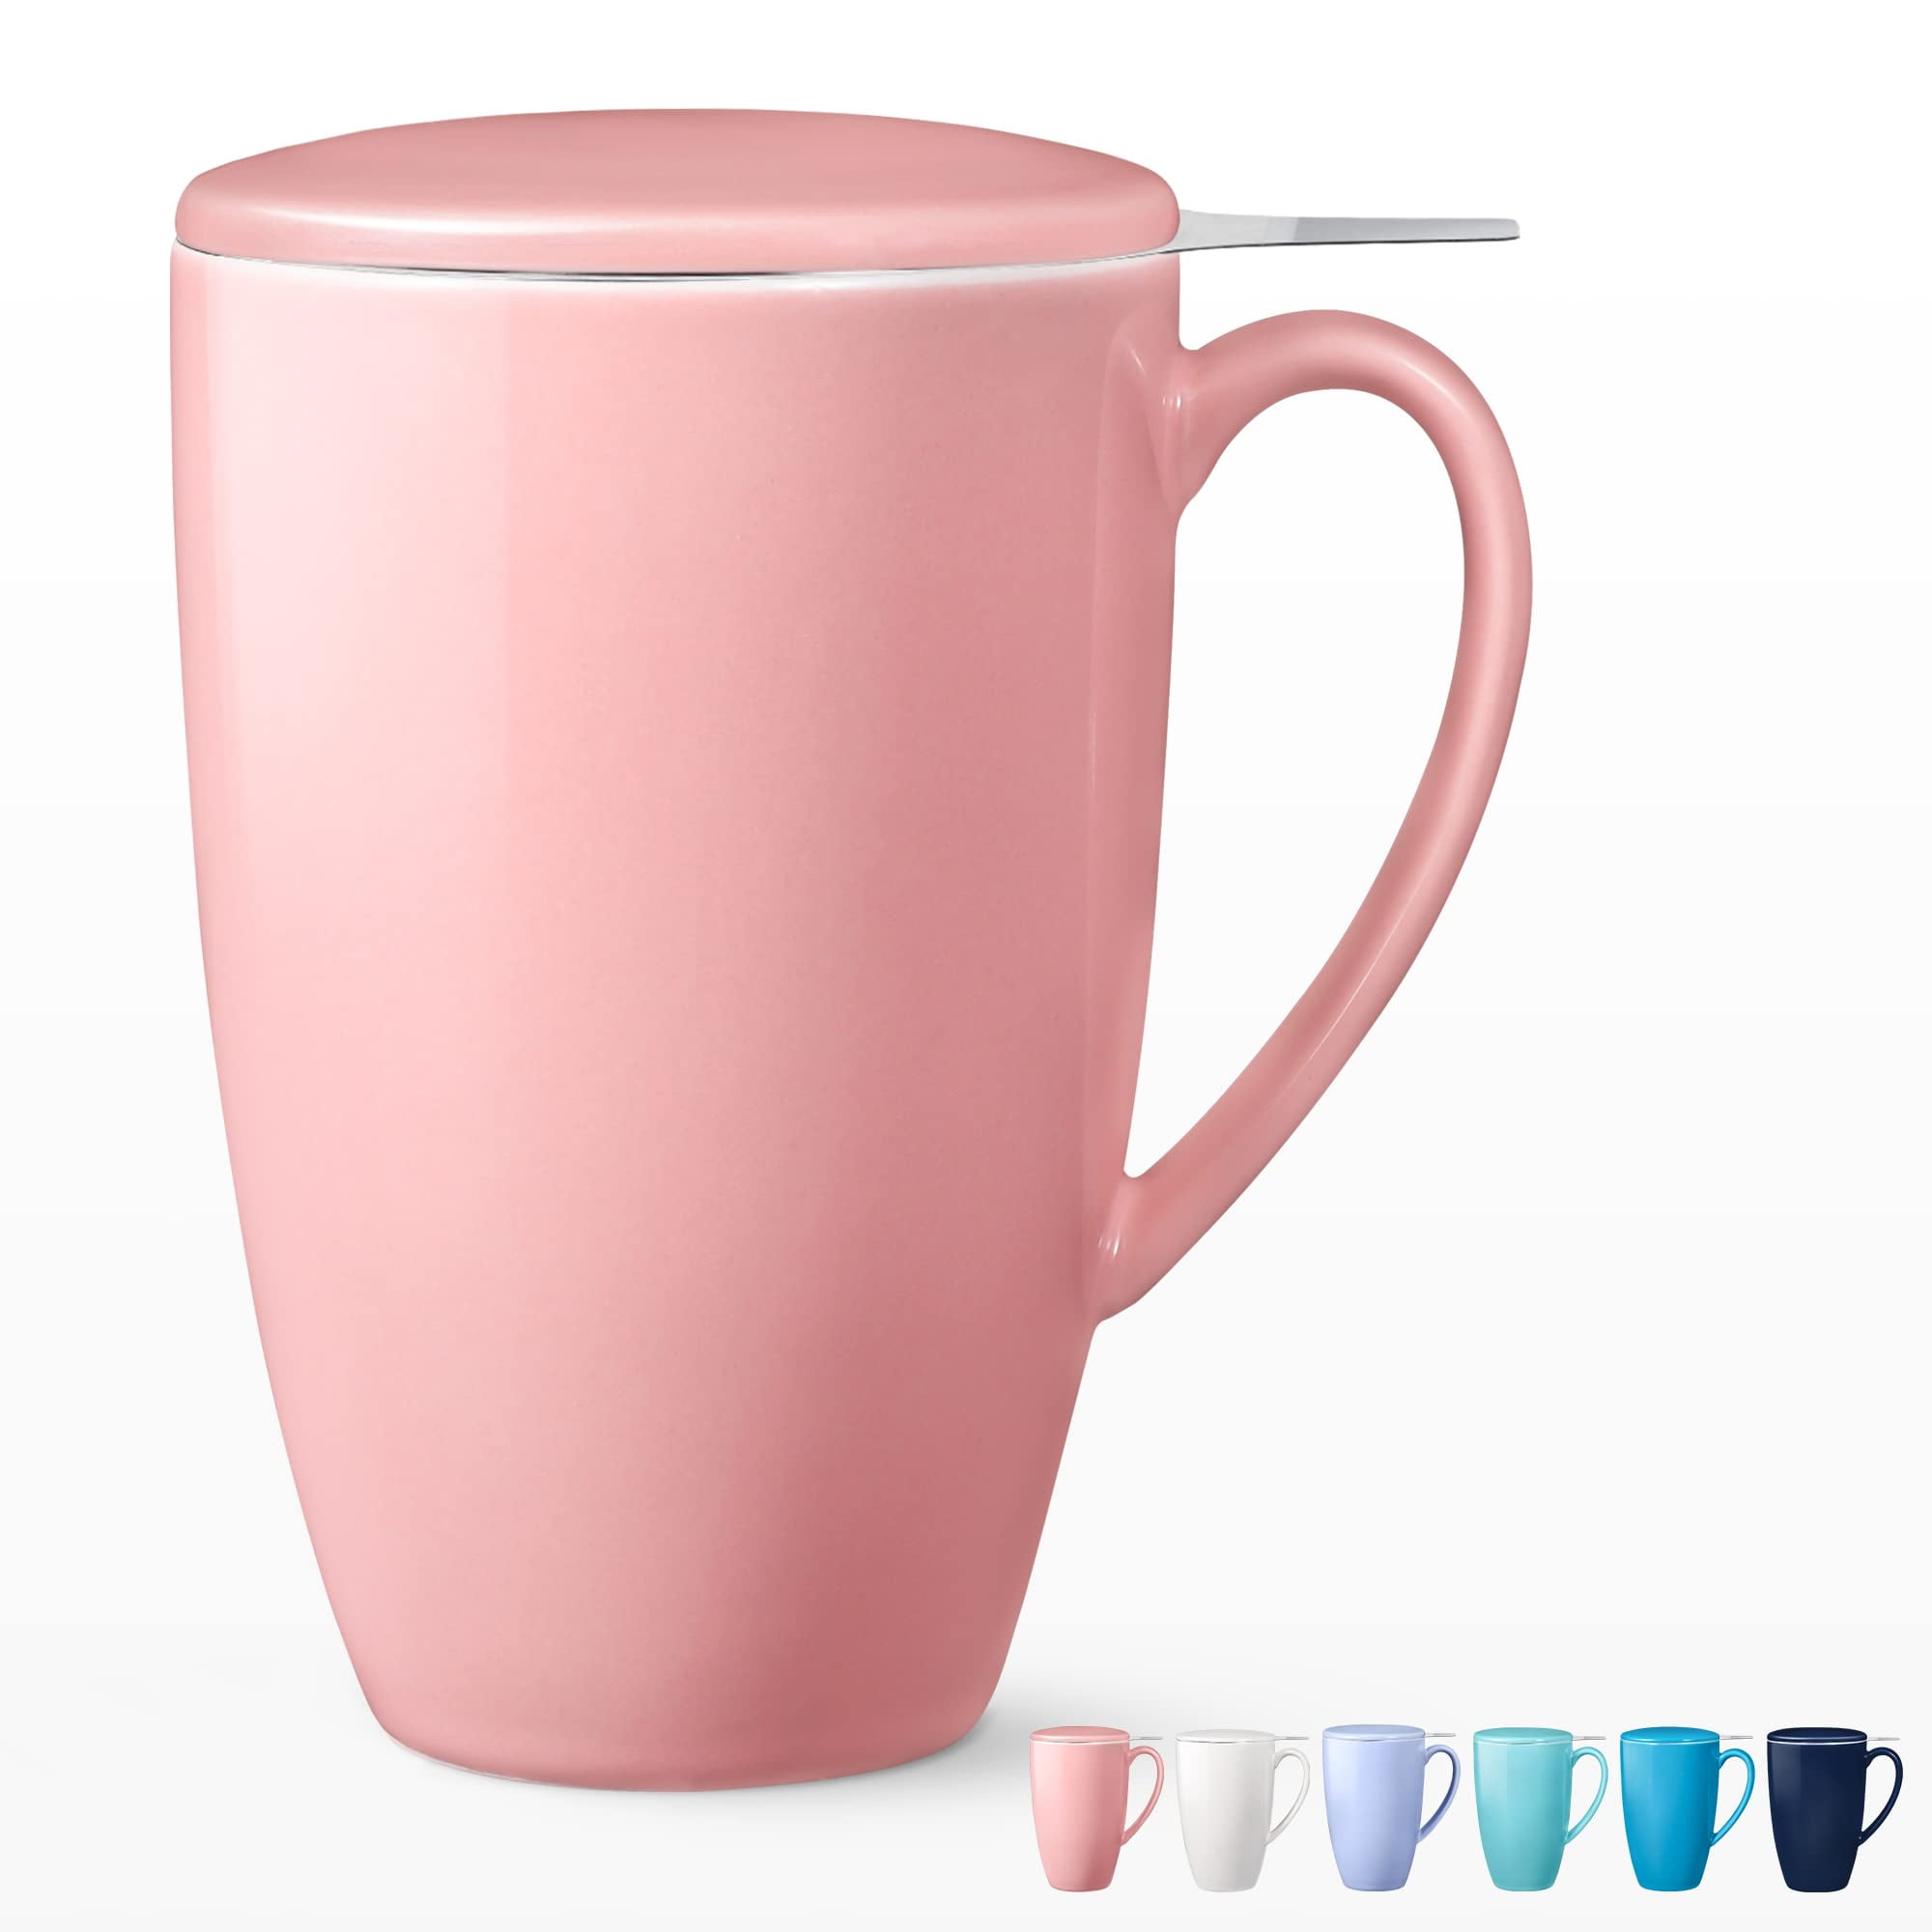 Sweese Porcelain Mugs - 16 Ounce (Top to the Rim) for Coffee, Tea, Cocoa,  Set of 4, Pink